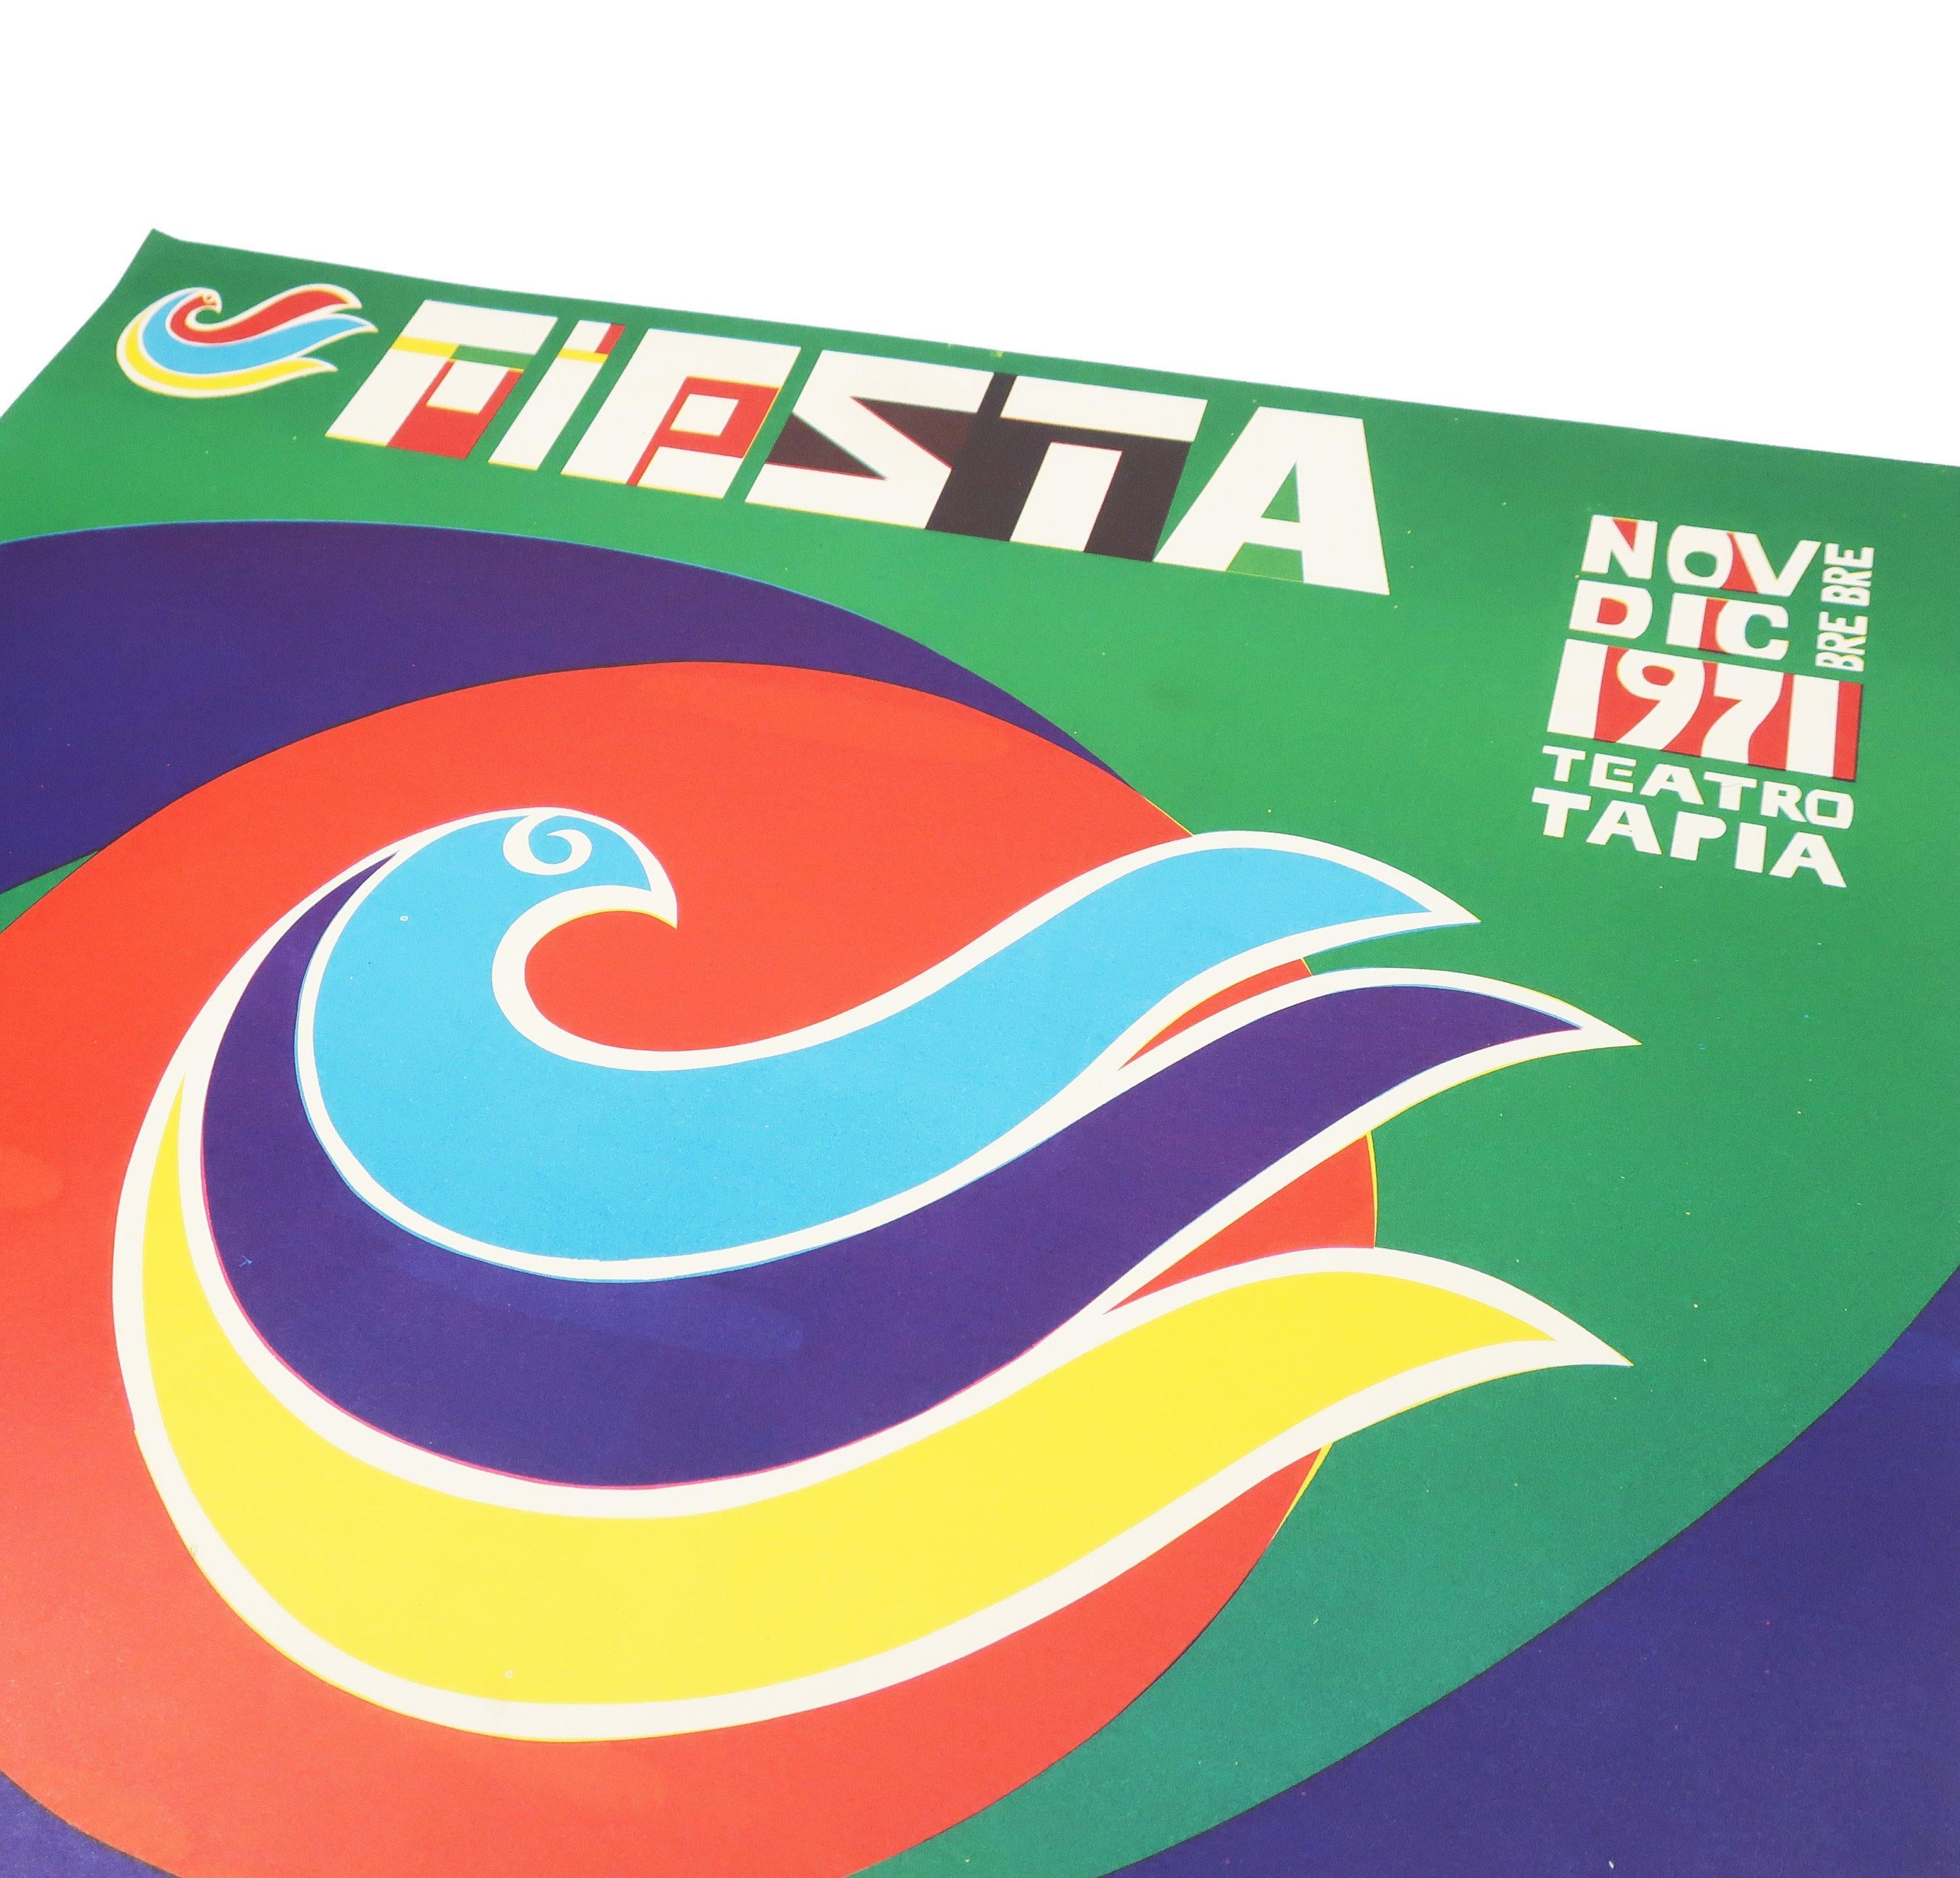 A serigraph for a 1971 festival of Puerto Rican music put on by the Instituto de Cultura Puertorriqueña, a government agency that encourage the study, preservation, promotion, enrichment, and diffusion of the cultural values of Puerto Rico. Centered